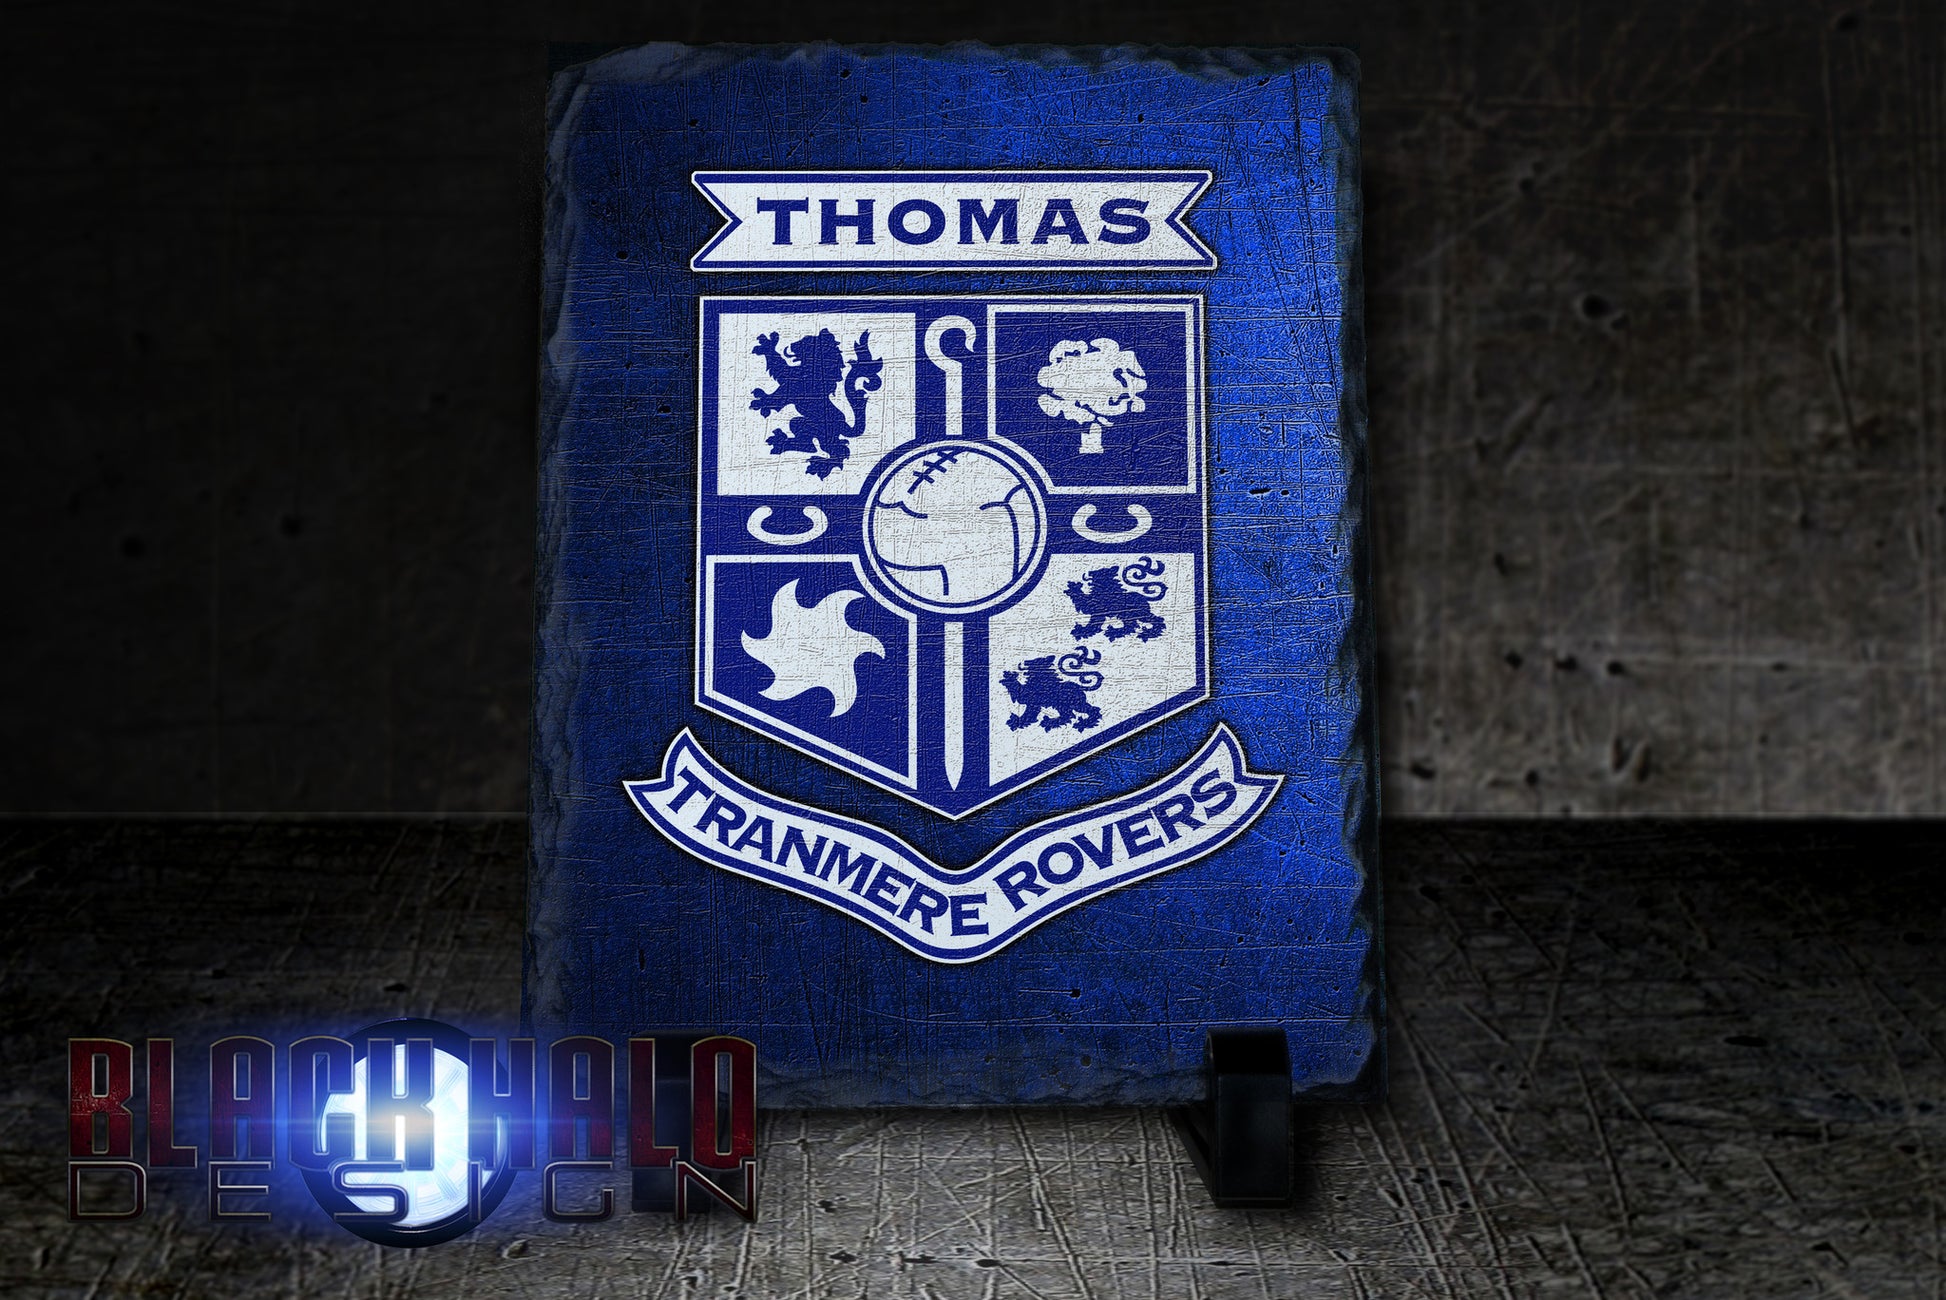 TRANMERE ROVERS RECTANGULAR NATURAL ROCK SLATE (CAN BE PERSONALISED) - Black Halo Design
 - 2